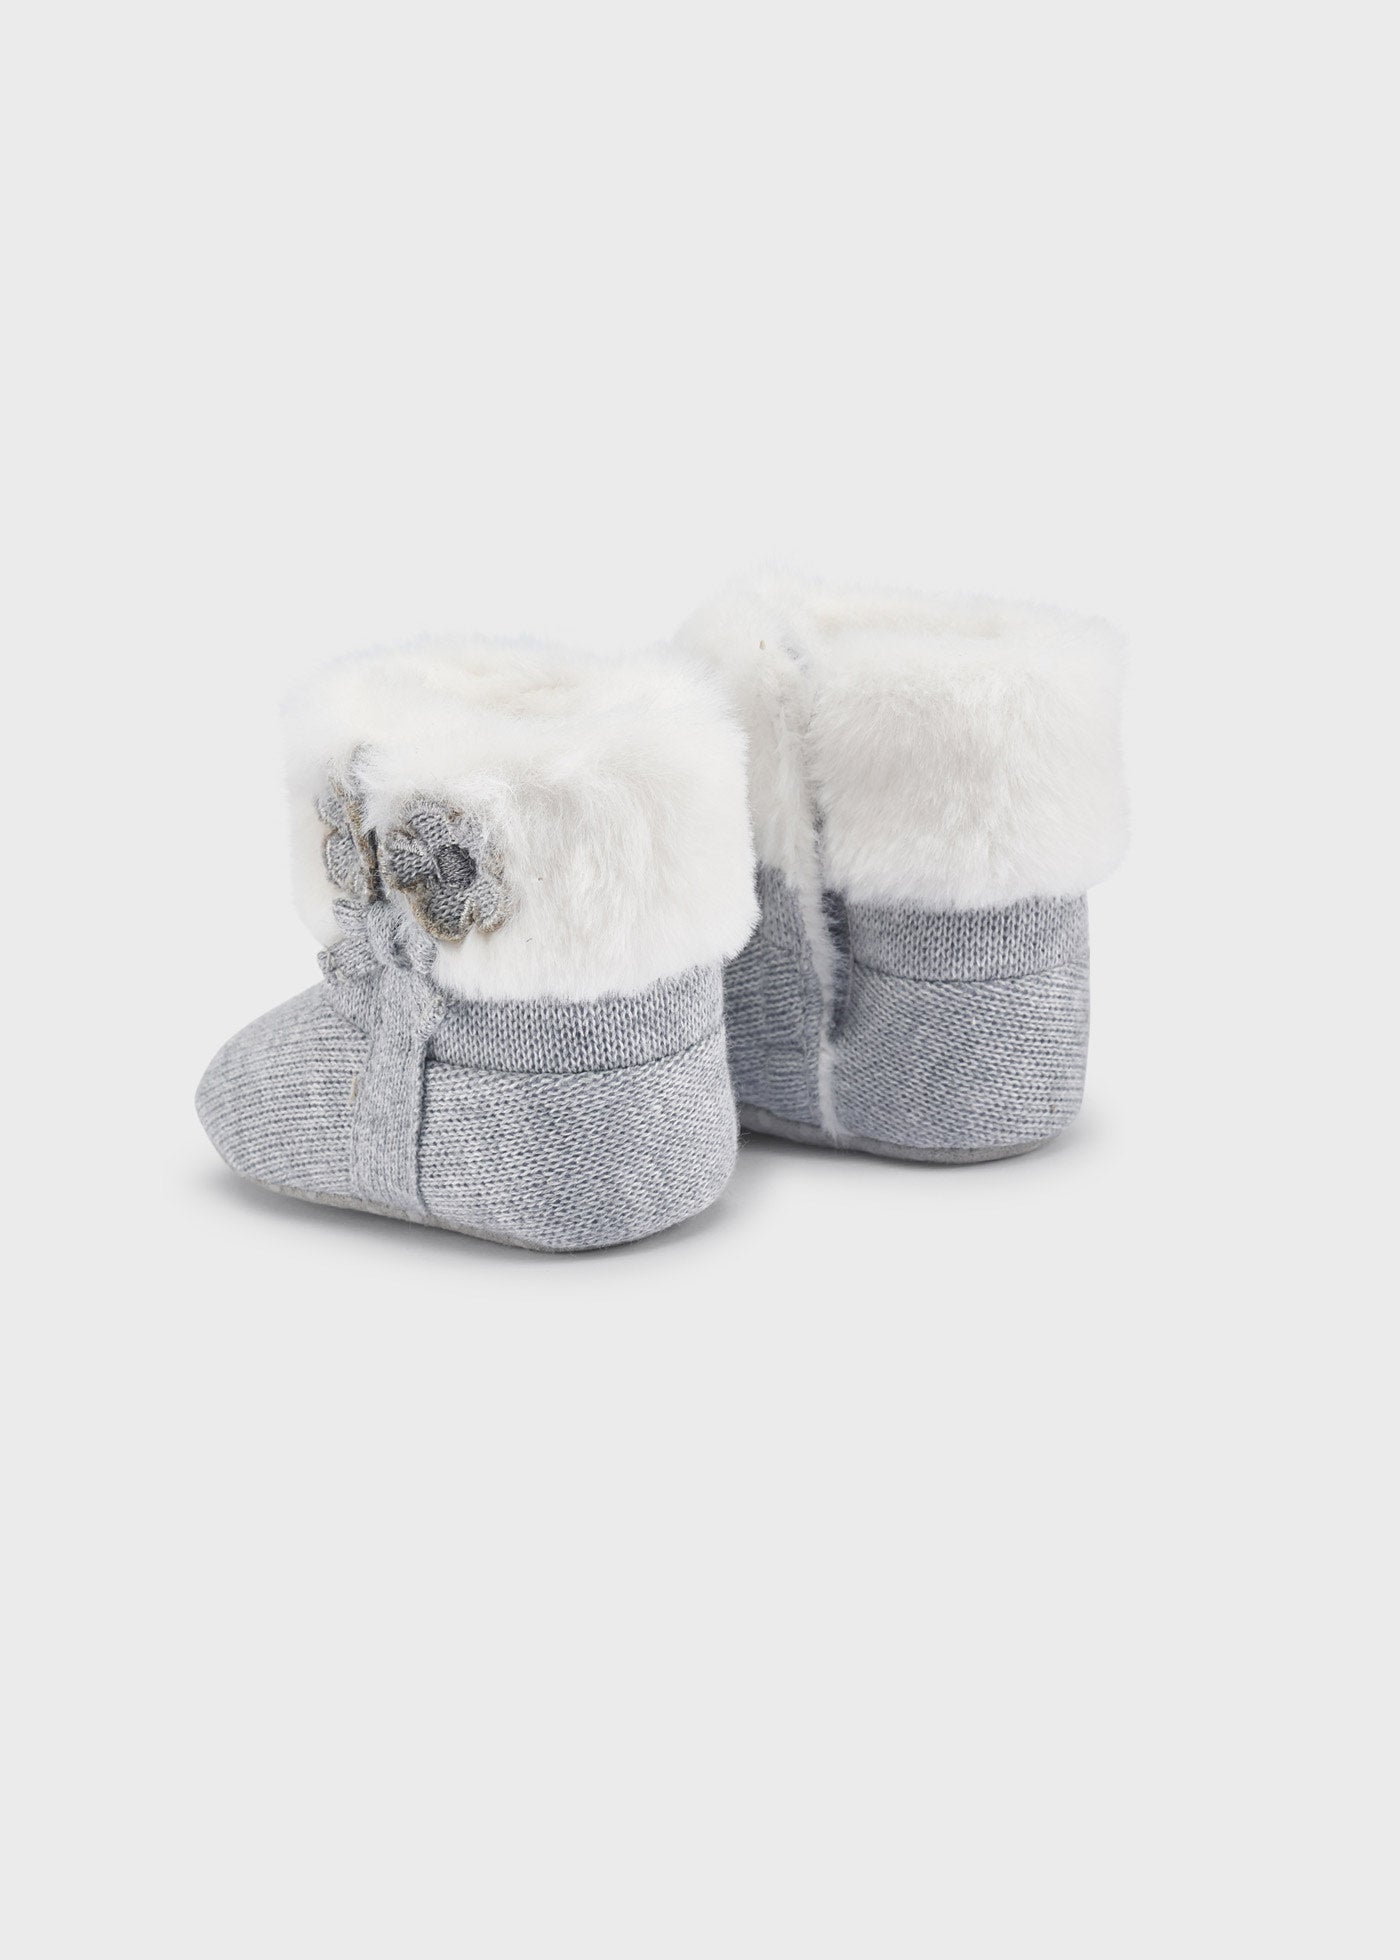 Mayoral Baby Knit Booties Grey _9567-037